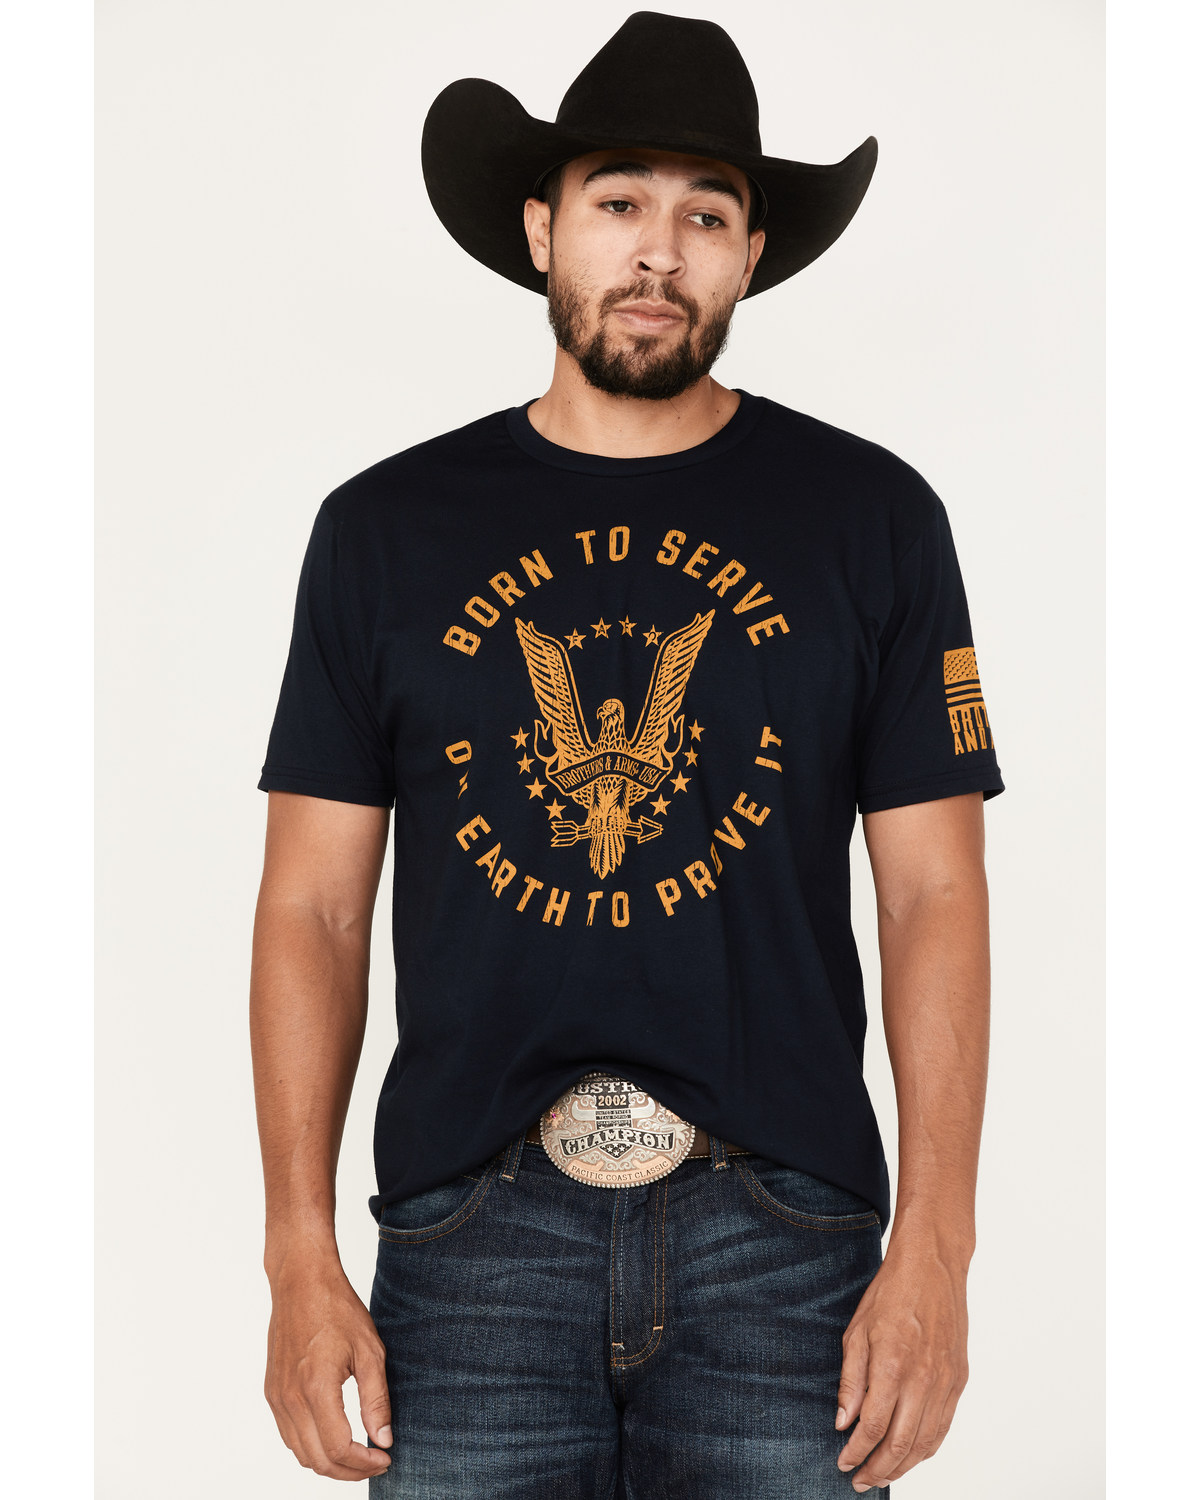 Brothers & Arms Men's Born To Serve Graphic T-Shirt